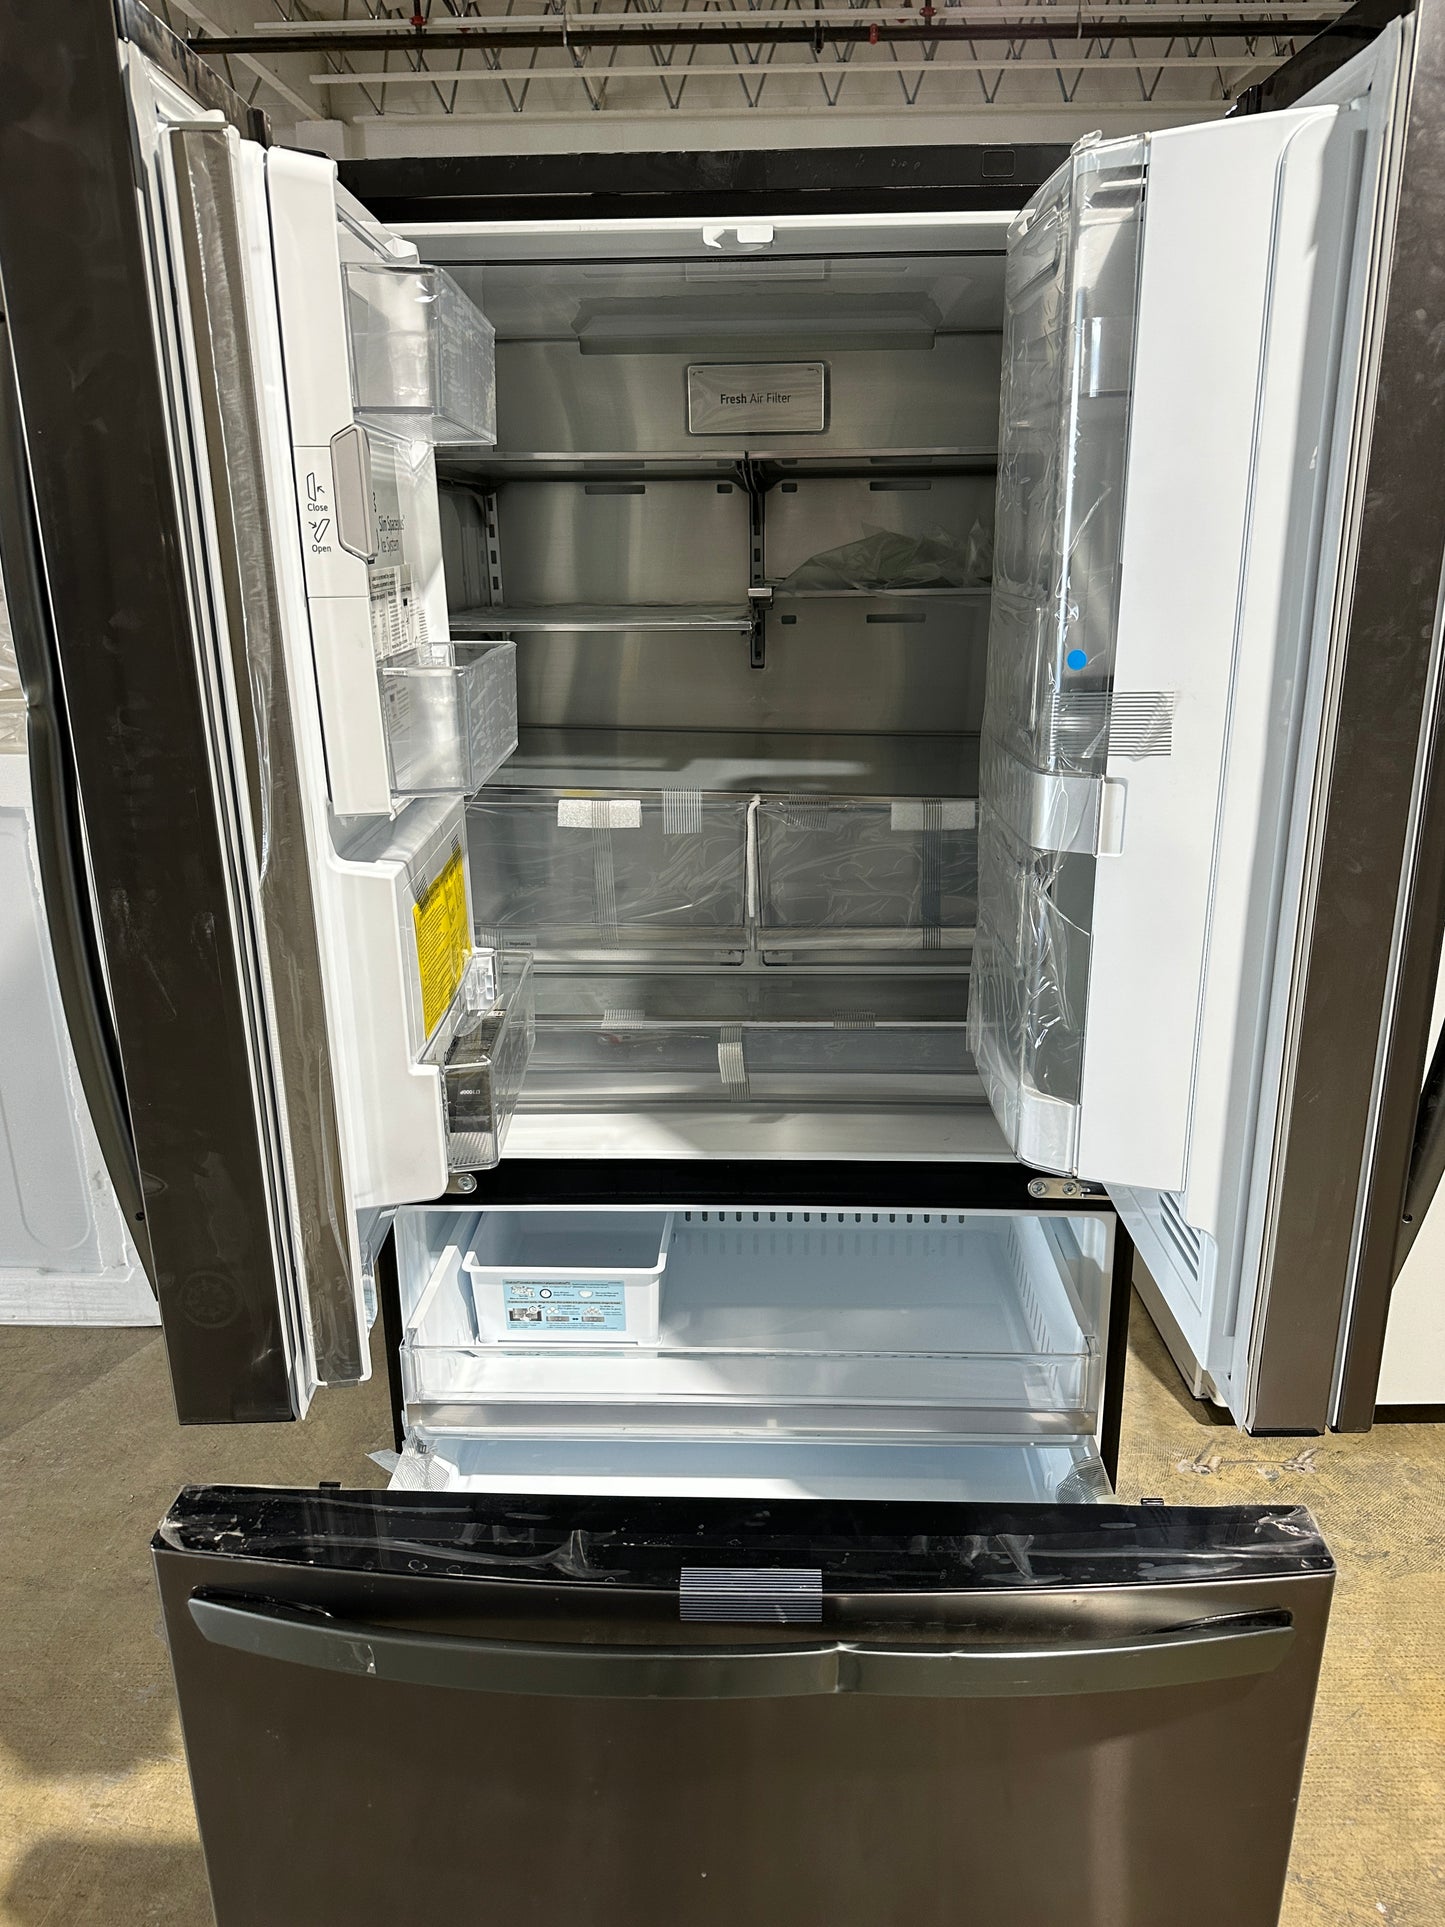 MAJORLY DISCOUNTED NEW LG SMART REFRIGERATOR WITH CRAFT ICE - REF11531S LRFVS3006D